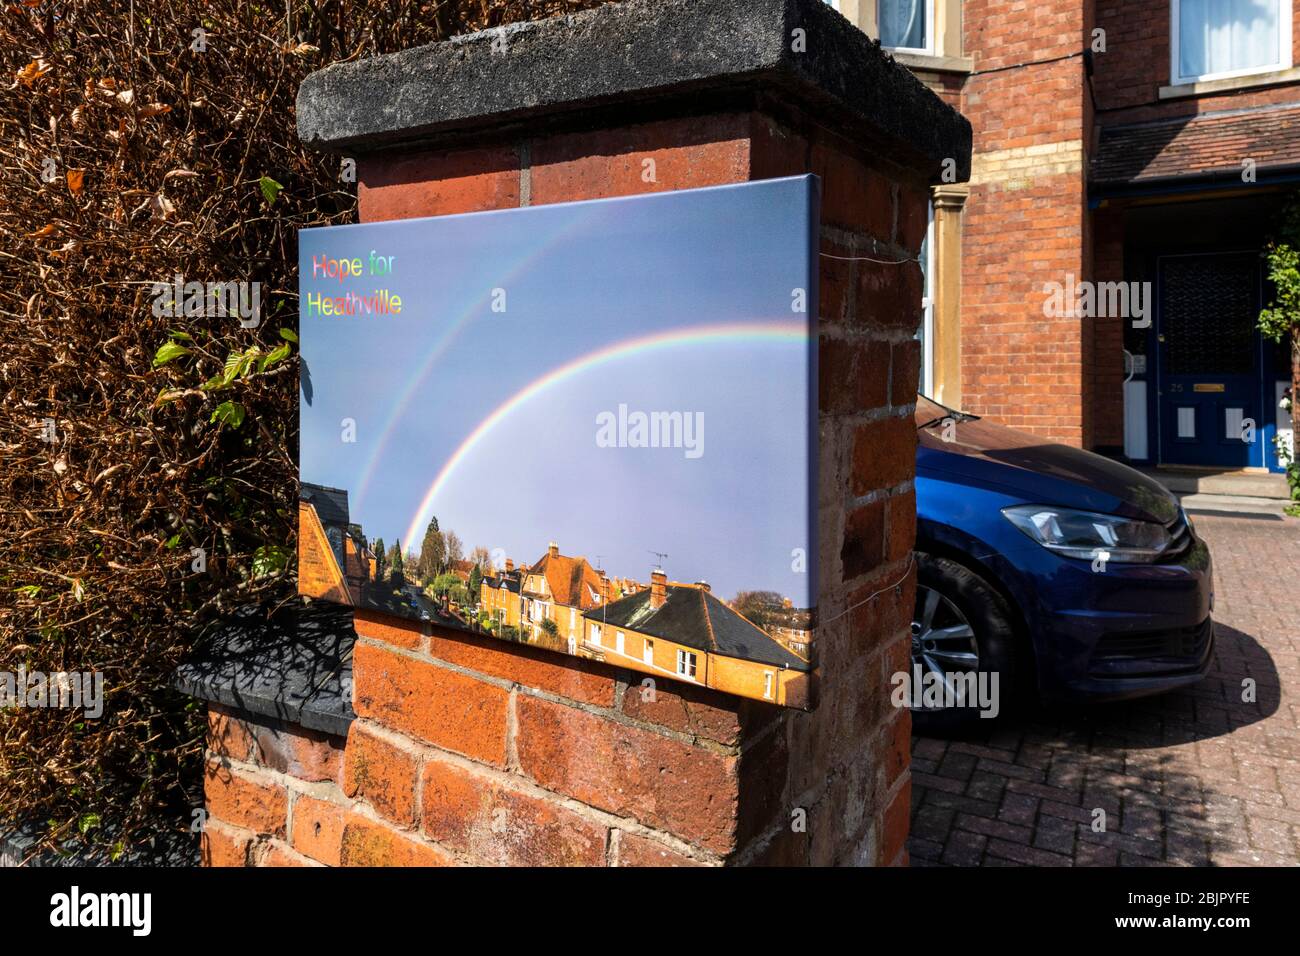 A large photograph of a double rainbow over Heathville Road Gloucester displayed to give hope to the local community during the Covid 19 lockdown. Stock Photo